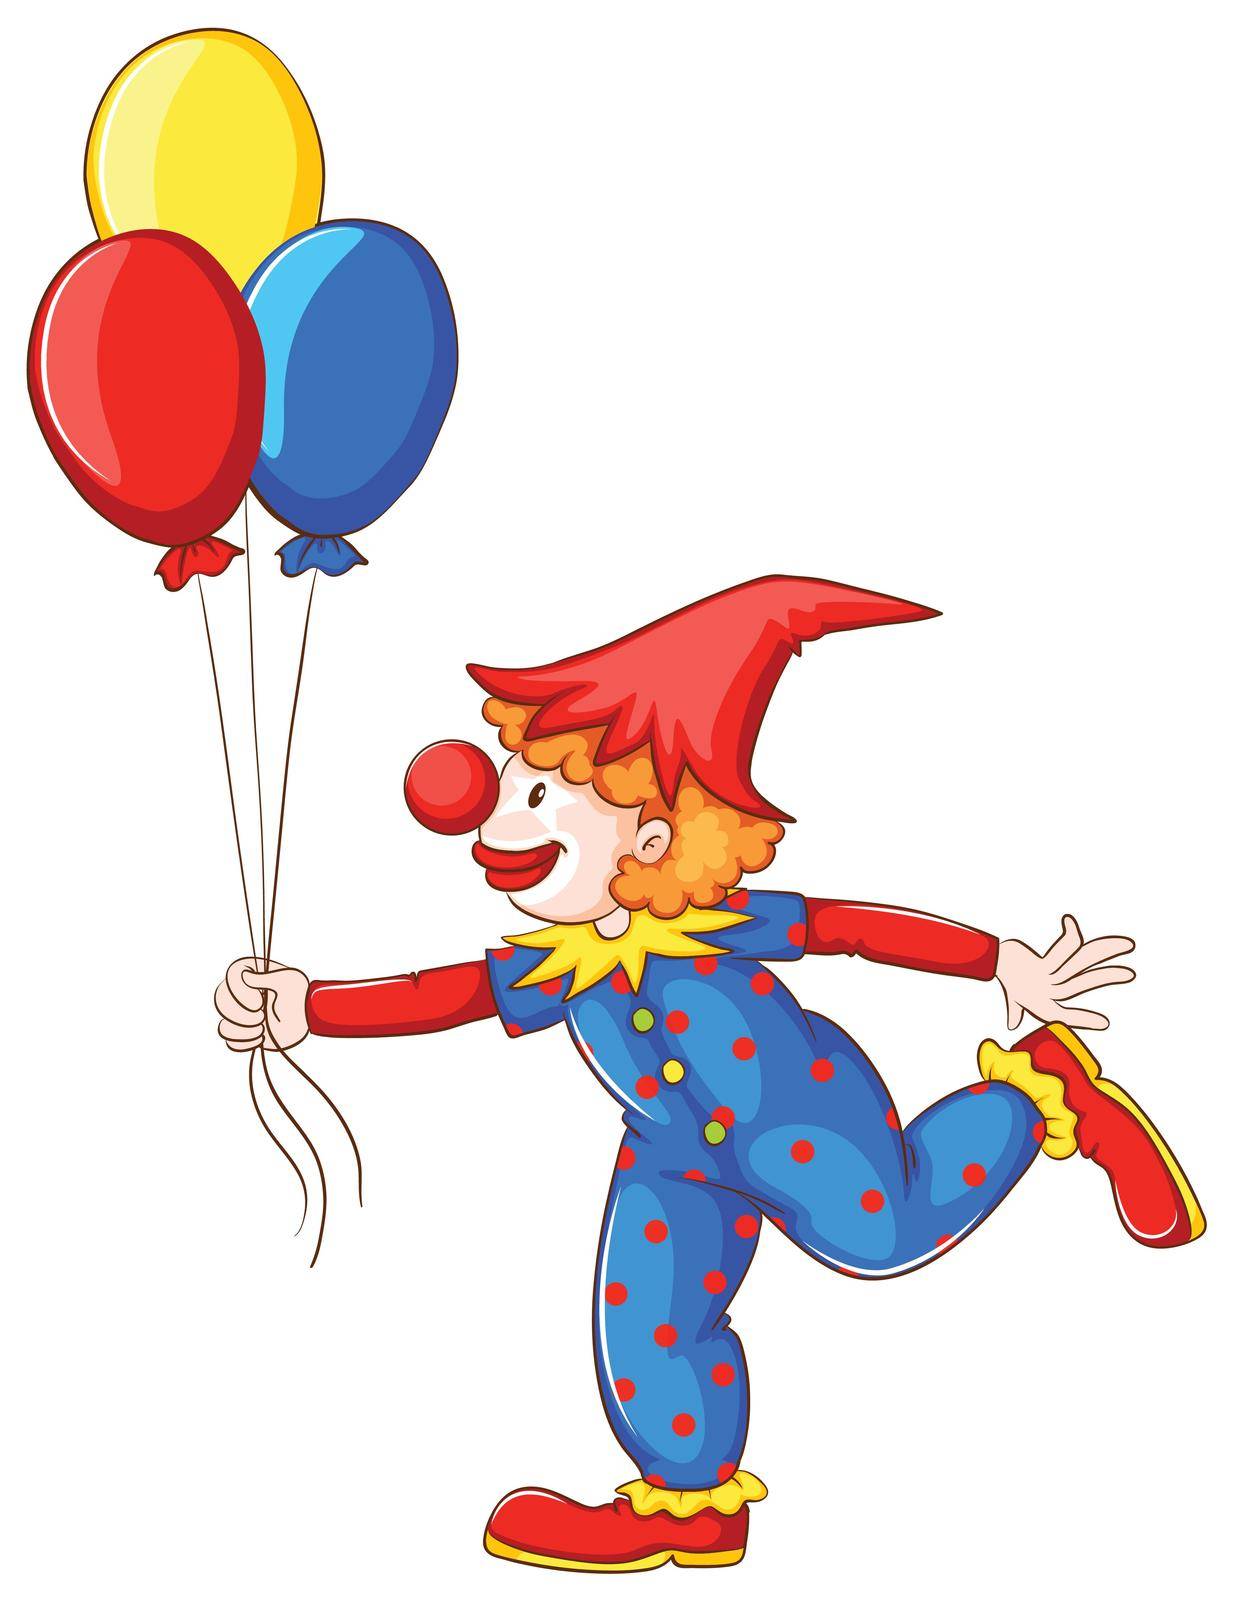 A coloured drawing of a clown with balloons on a white background